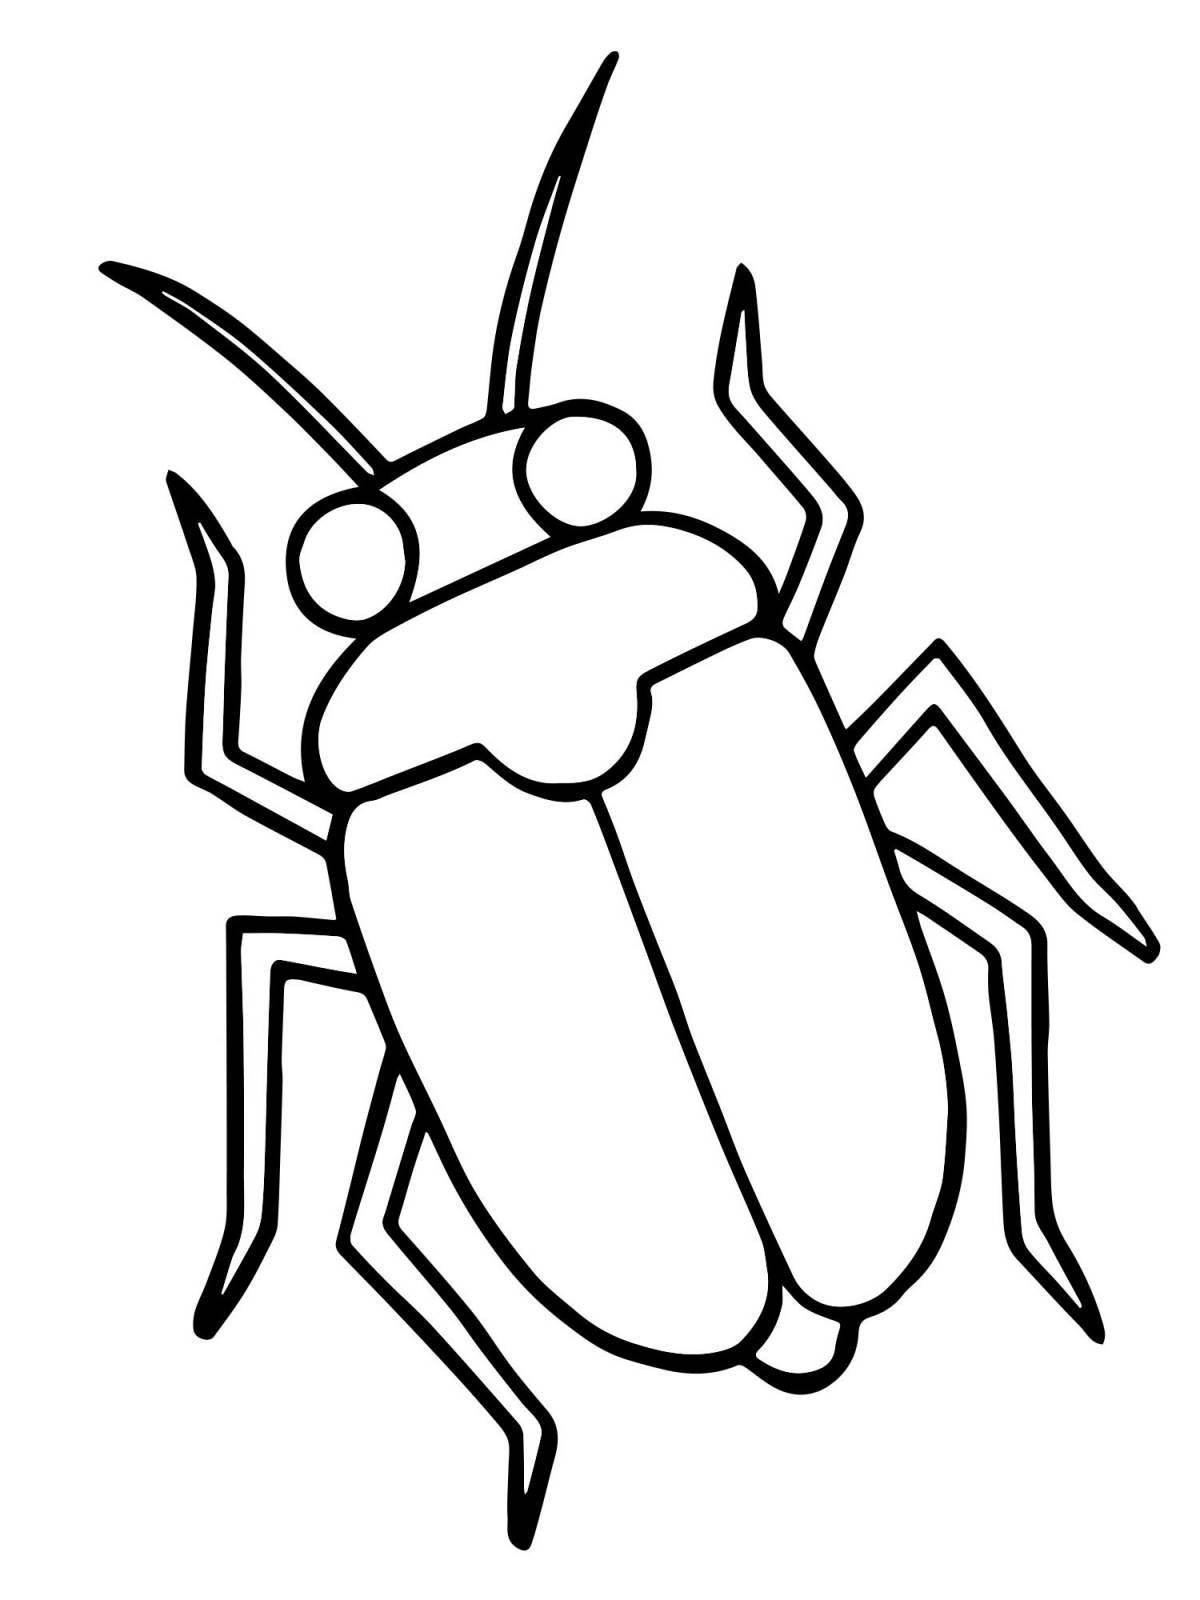 Exciting beetle coloring book for kids